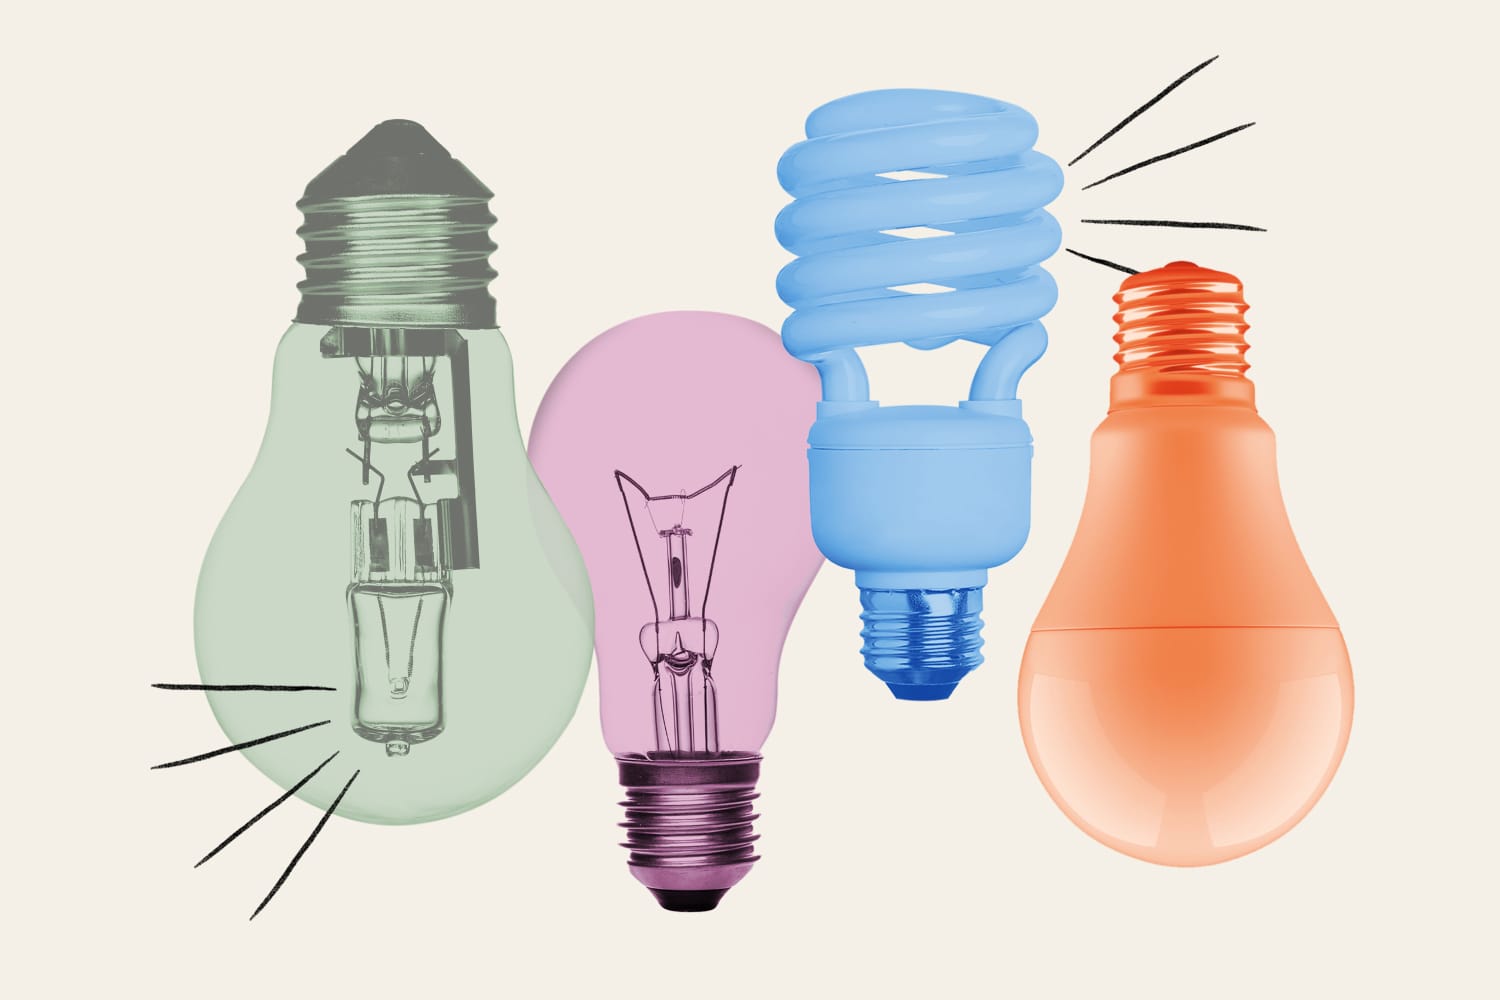 4 Types of Lightbulbs and How to Identify Them